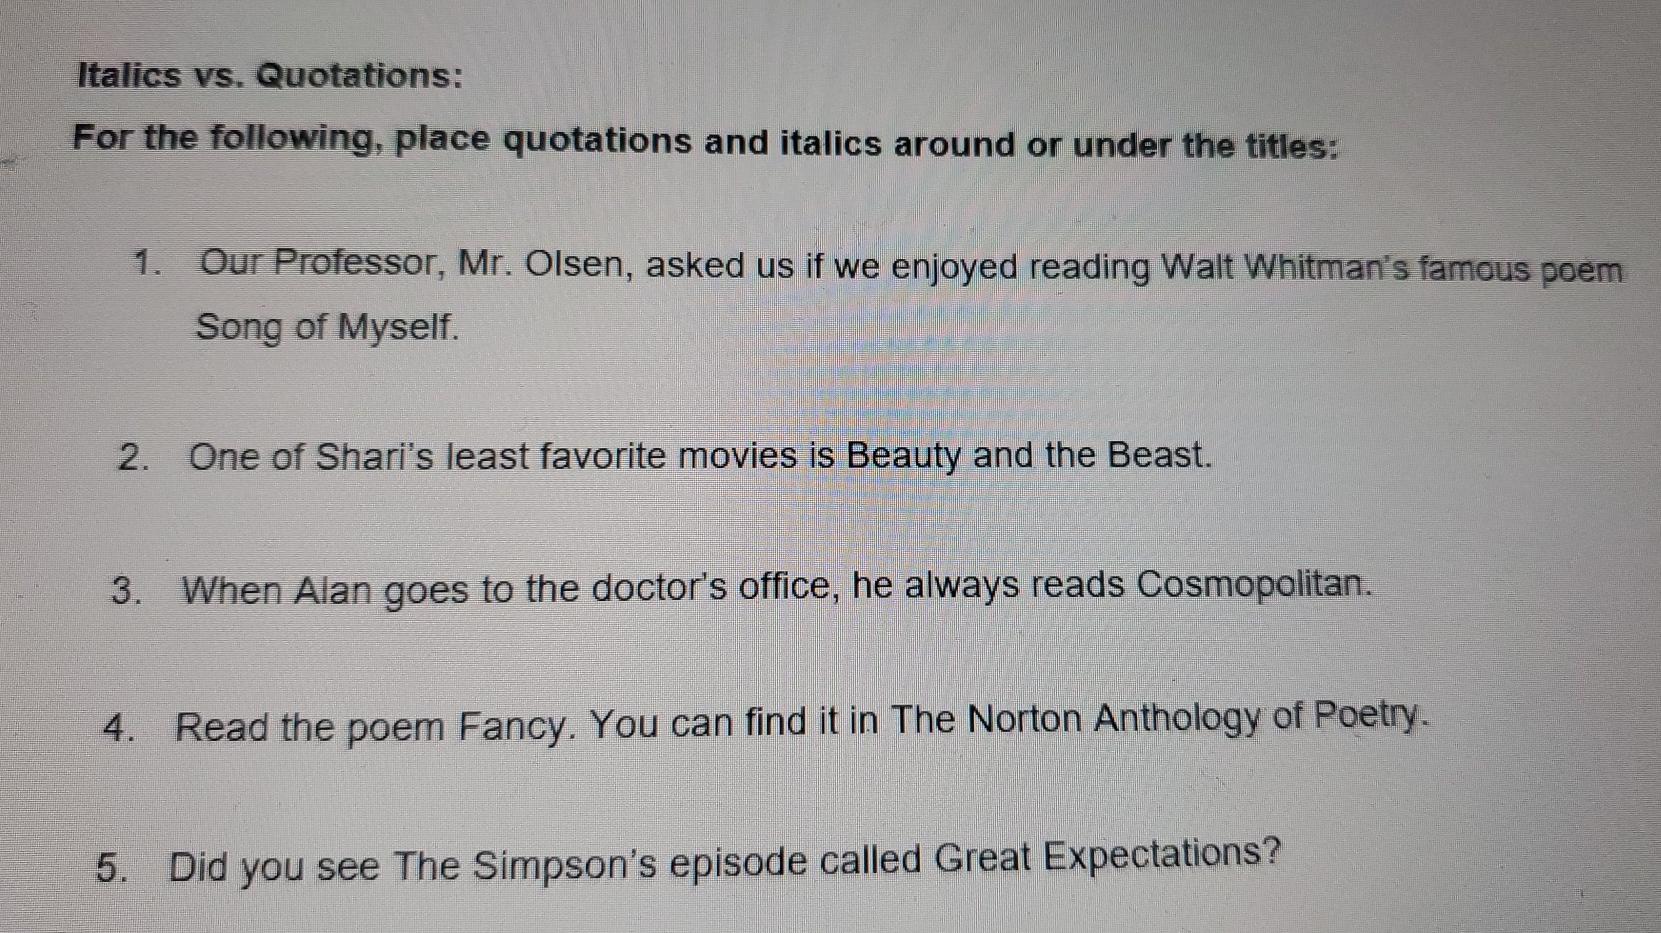 doctor who poems the beast below